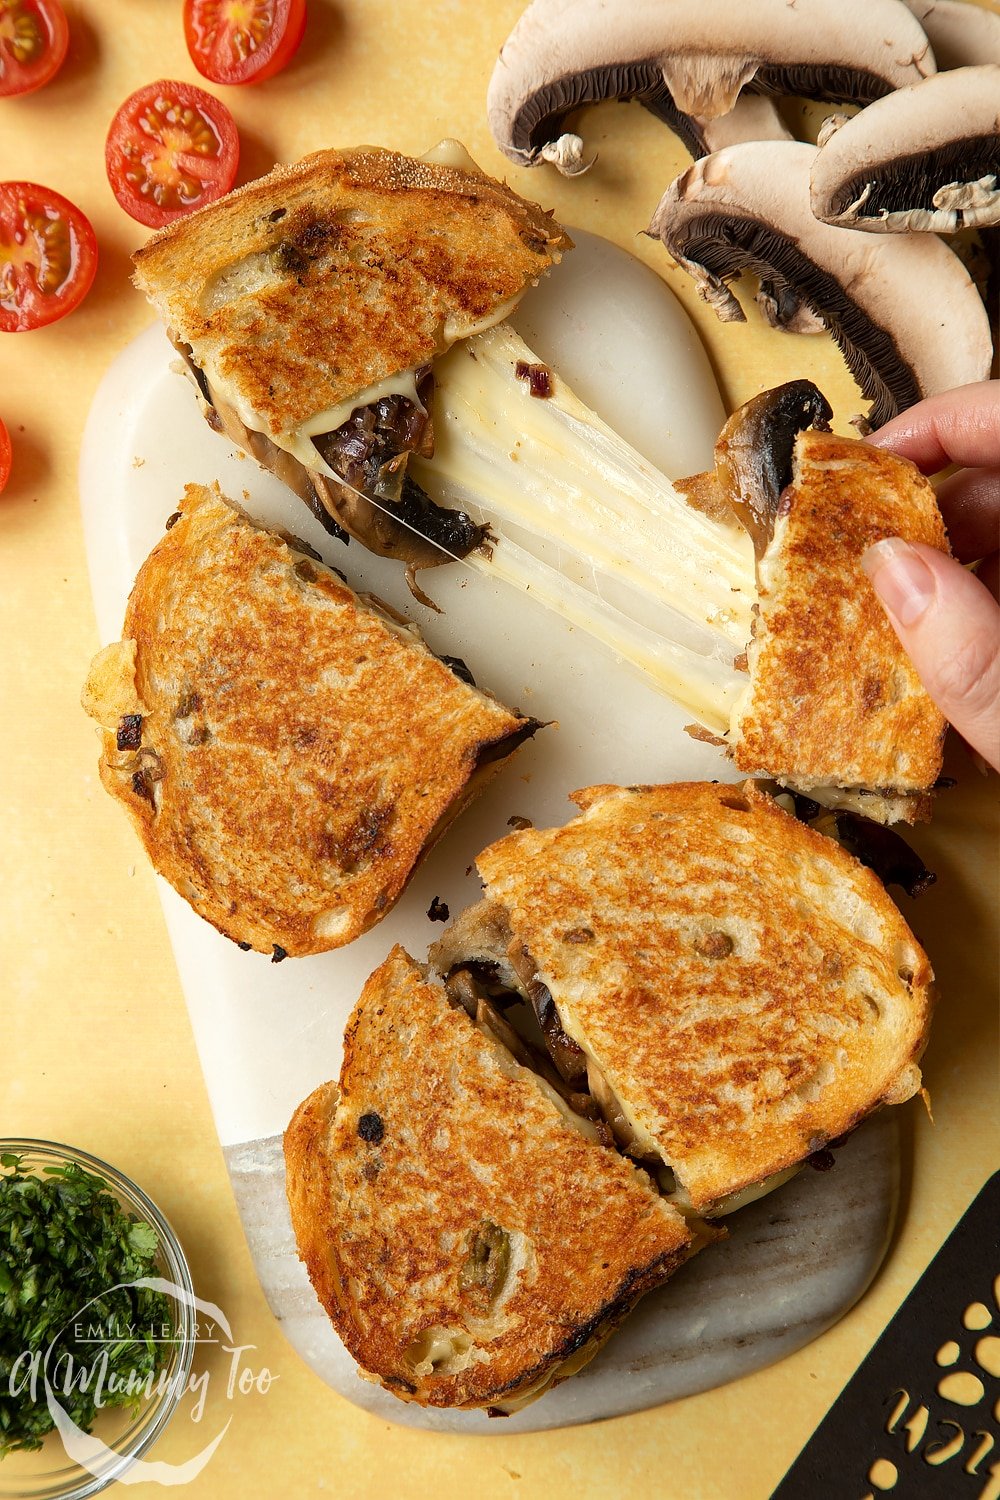 Two Jarlsberg cheese and mushroom toasties are on a serving board, one is being pulled apart so the cheese stretches out between them.